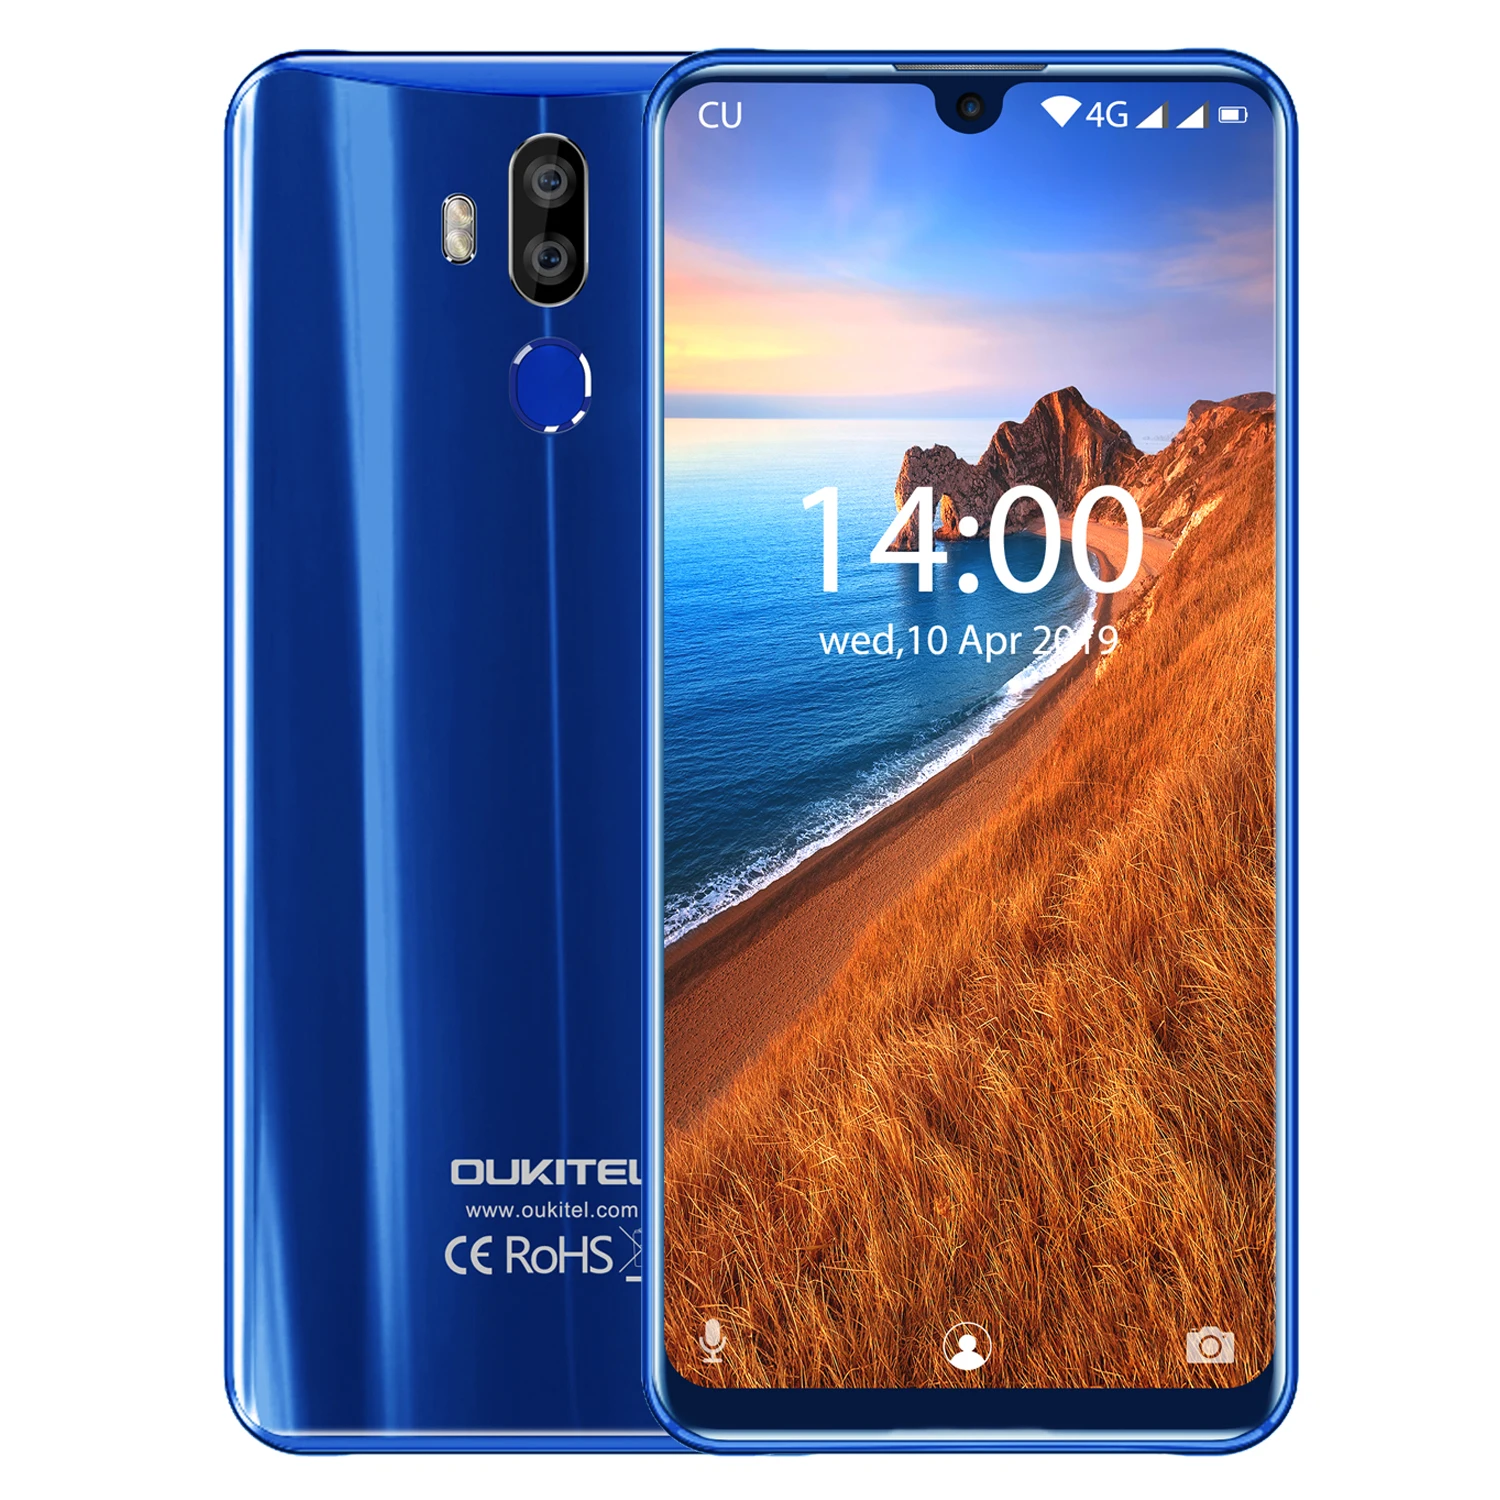 

OUKITEL K9 Waterdrop 7.12" FHD+ 1080*2244 4GB 64GB Face ID Smartphone 16MP+2MP/8MP Mobile Phone 6000mAh 5V/6A Quick Charge OTG